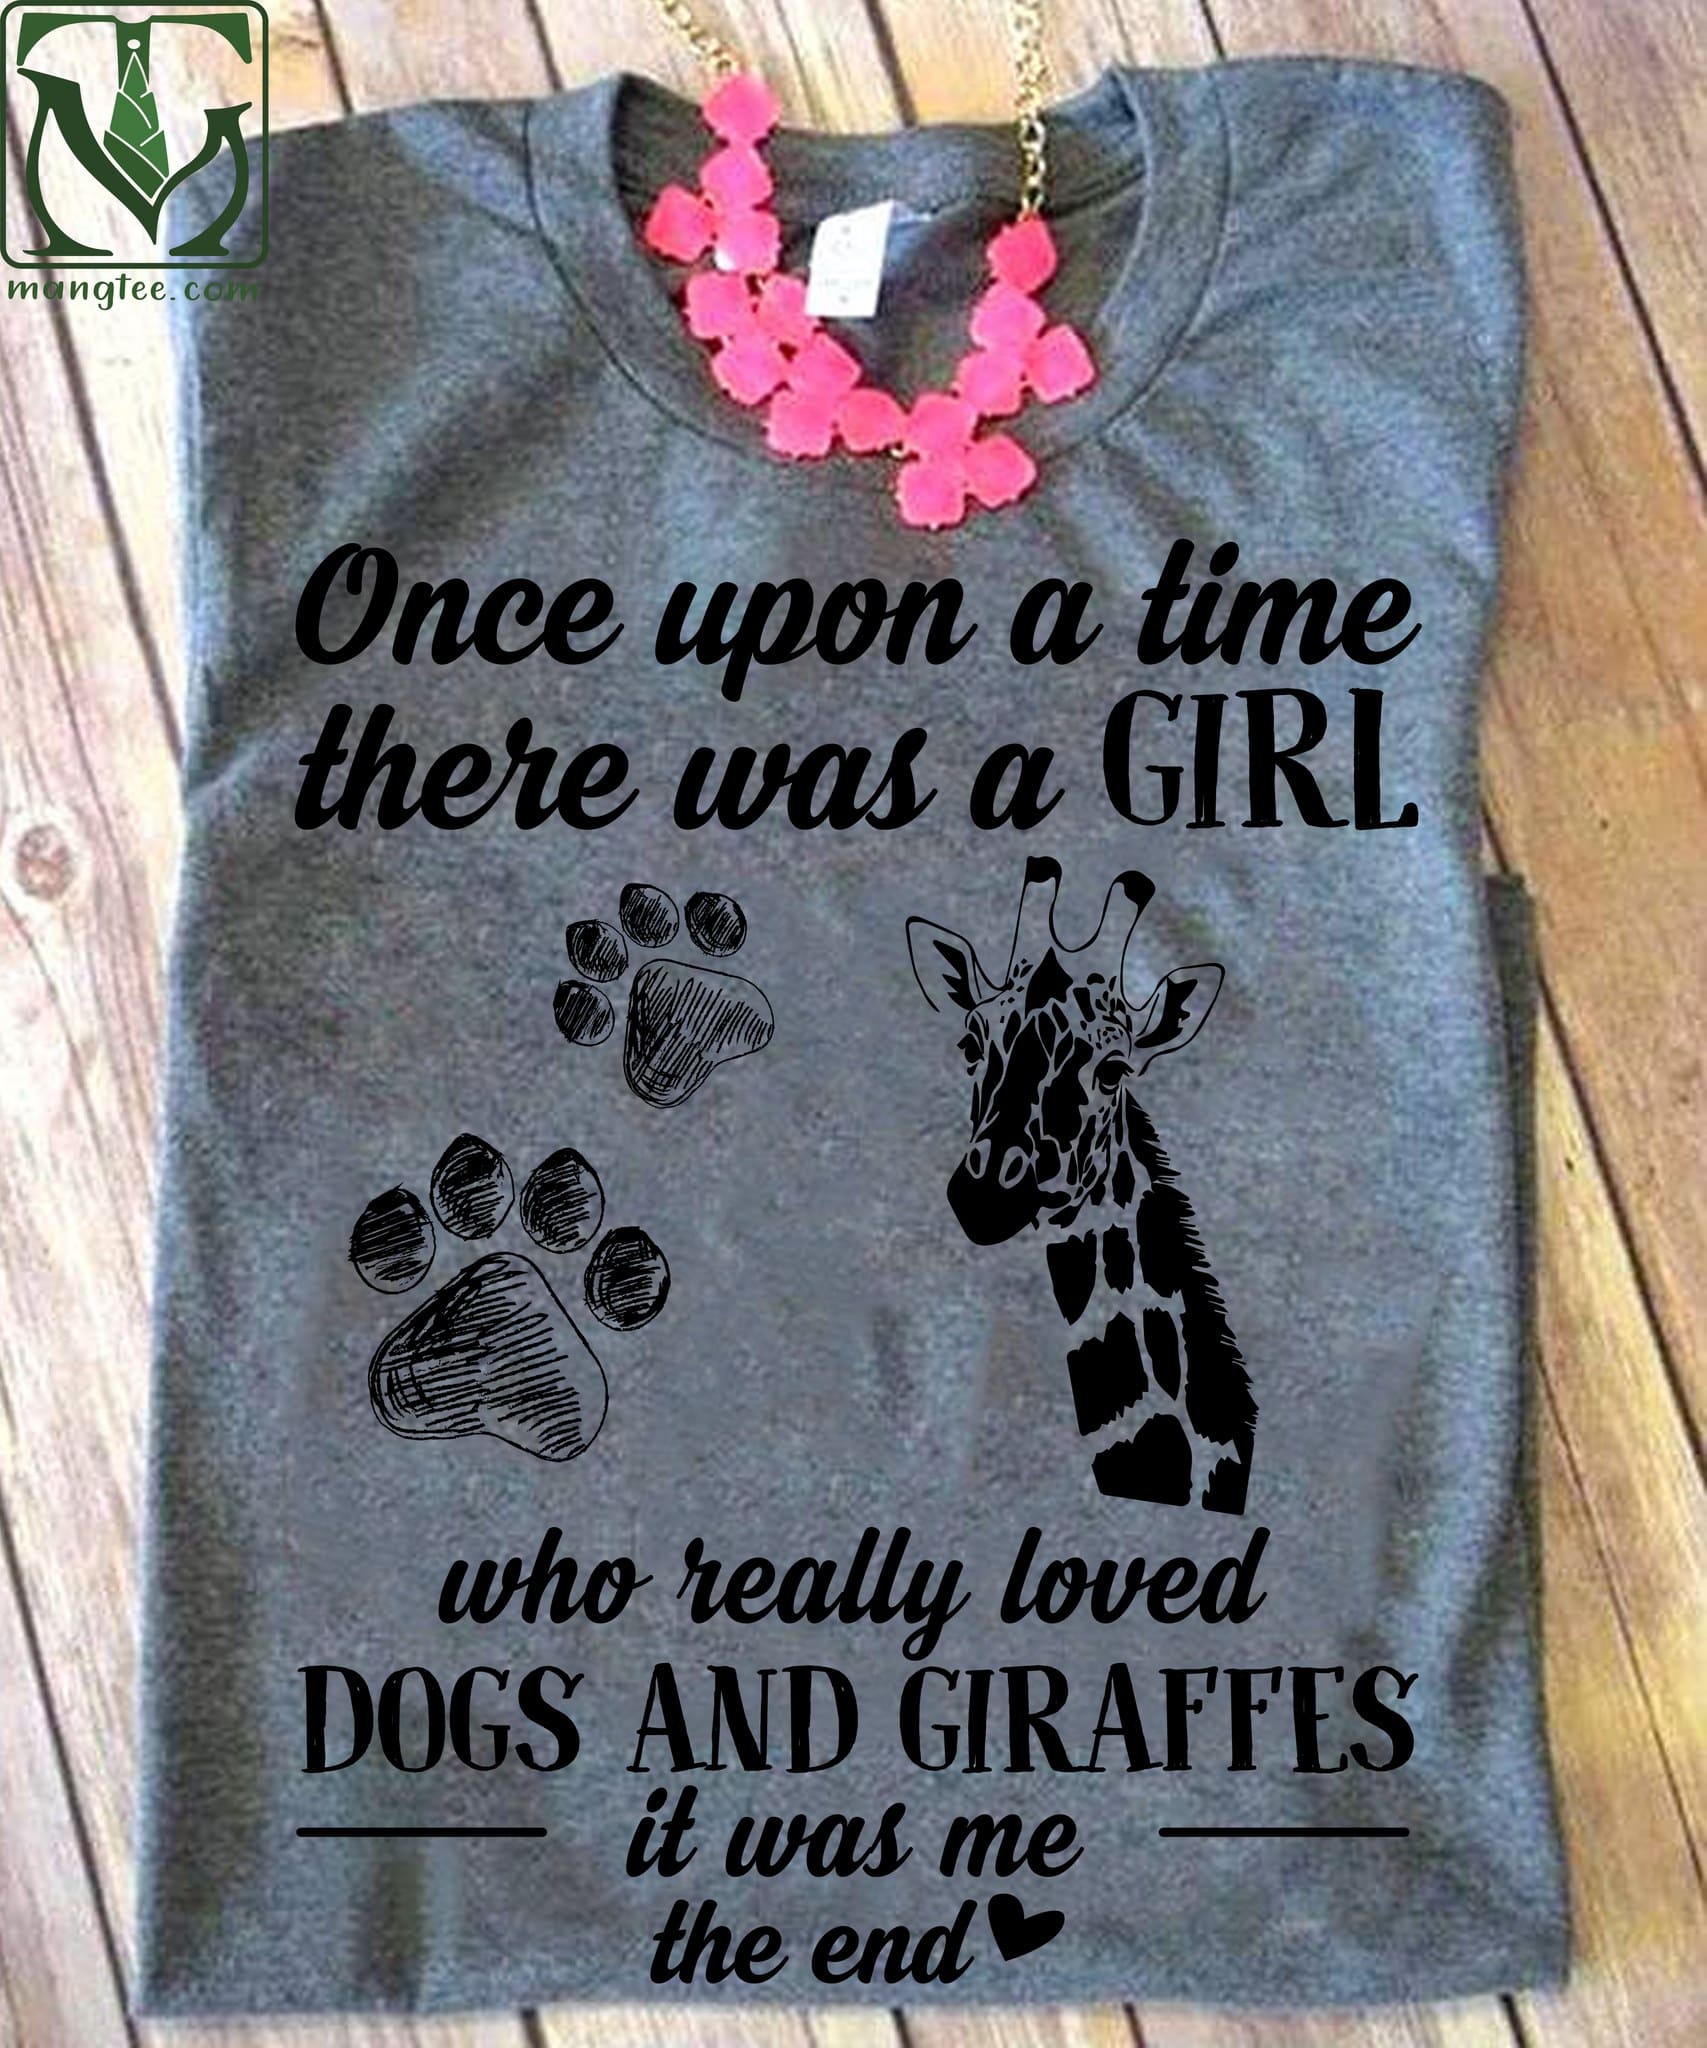 Dog Giraffes Footprint - Once upon a time there was a girl who really loved dogs and giraffes it was me the end